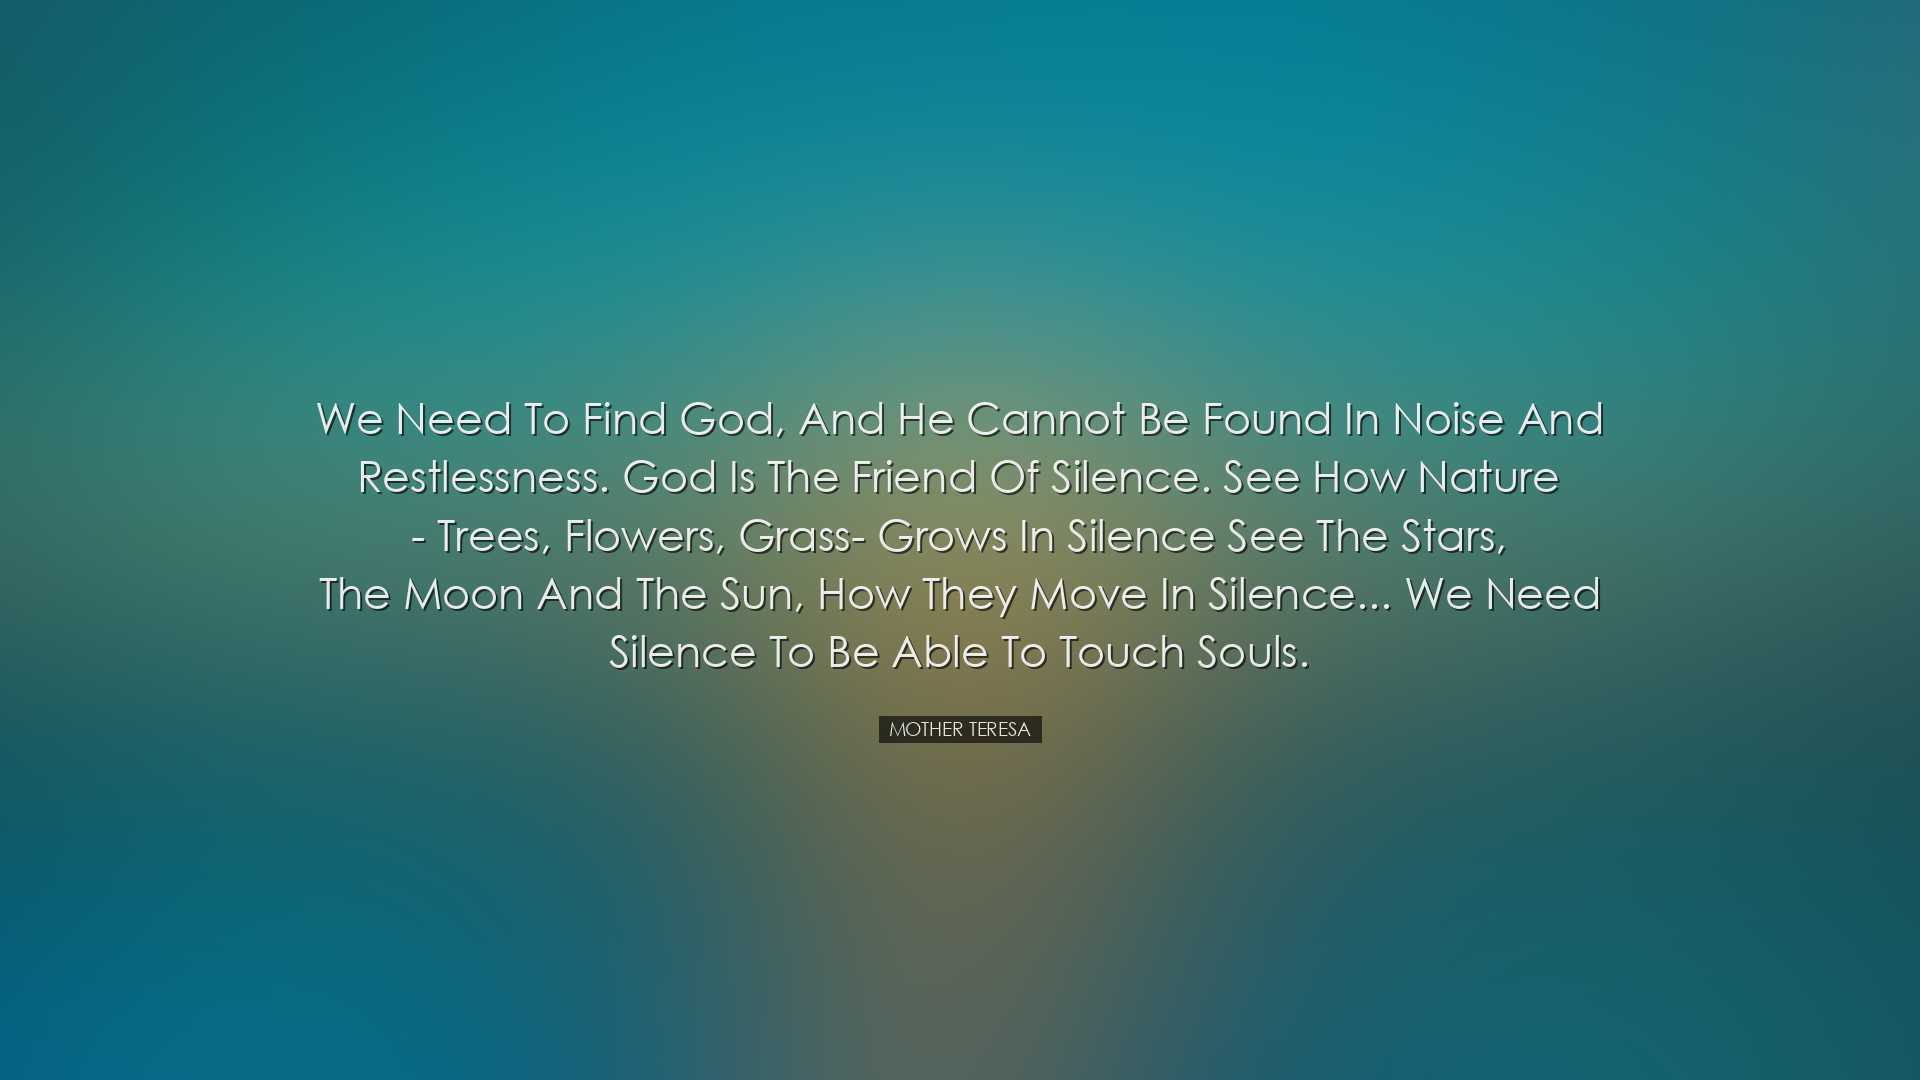 We need to find God, and he cannot be found in noise and restlessn